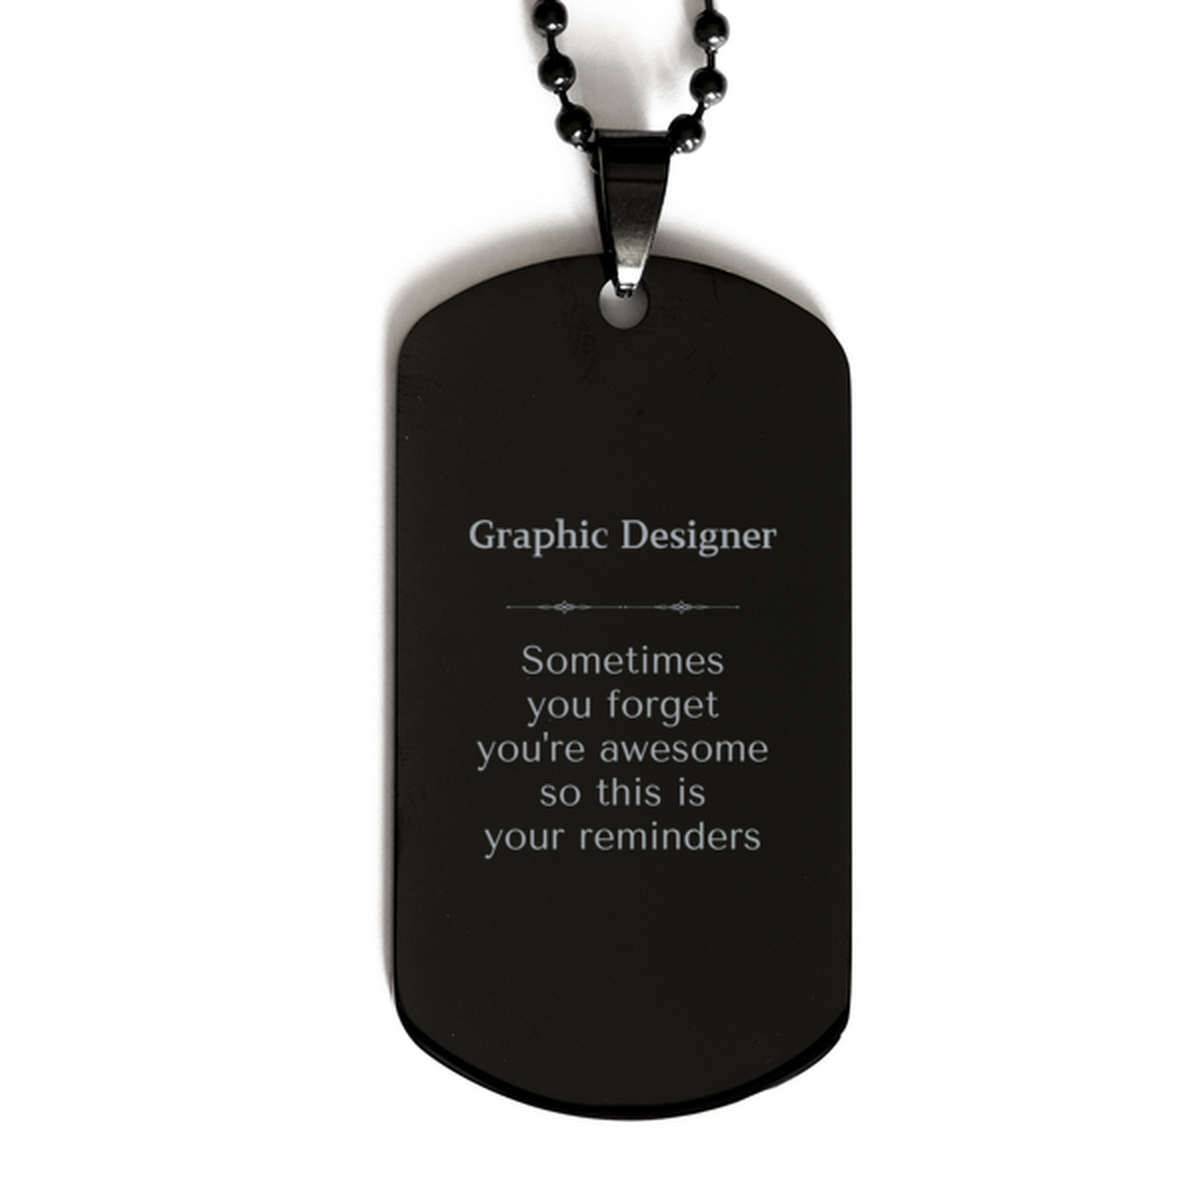 Sentimental Graphic Designer Black Dog Tag, Graphic Designer Sometimes you forget you're awesome so this is your reminders, Graduation Christmas Birthday Gifts for Graphic Designer, Men, Women, Coworkers